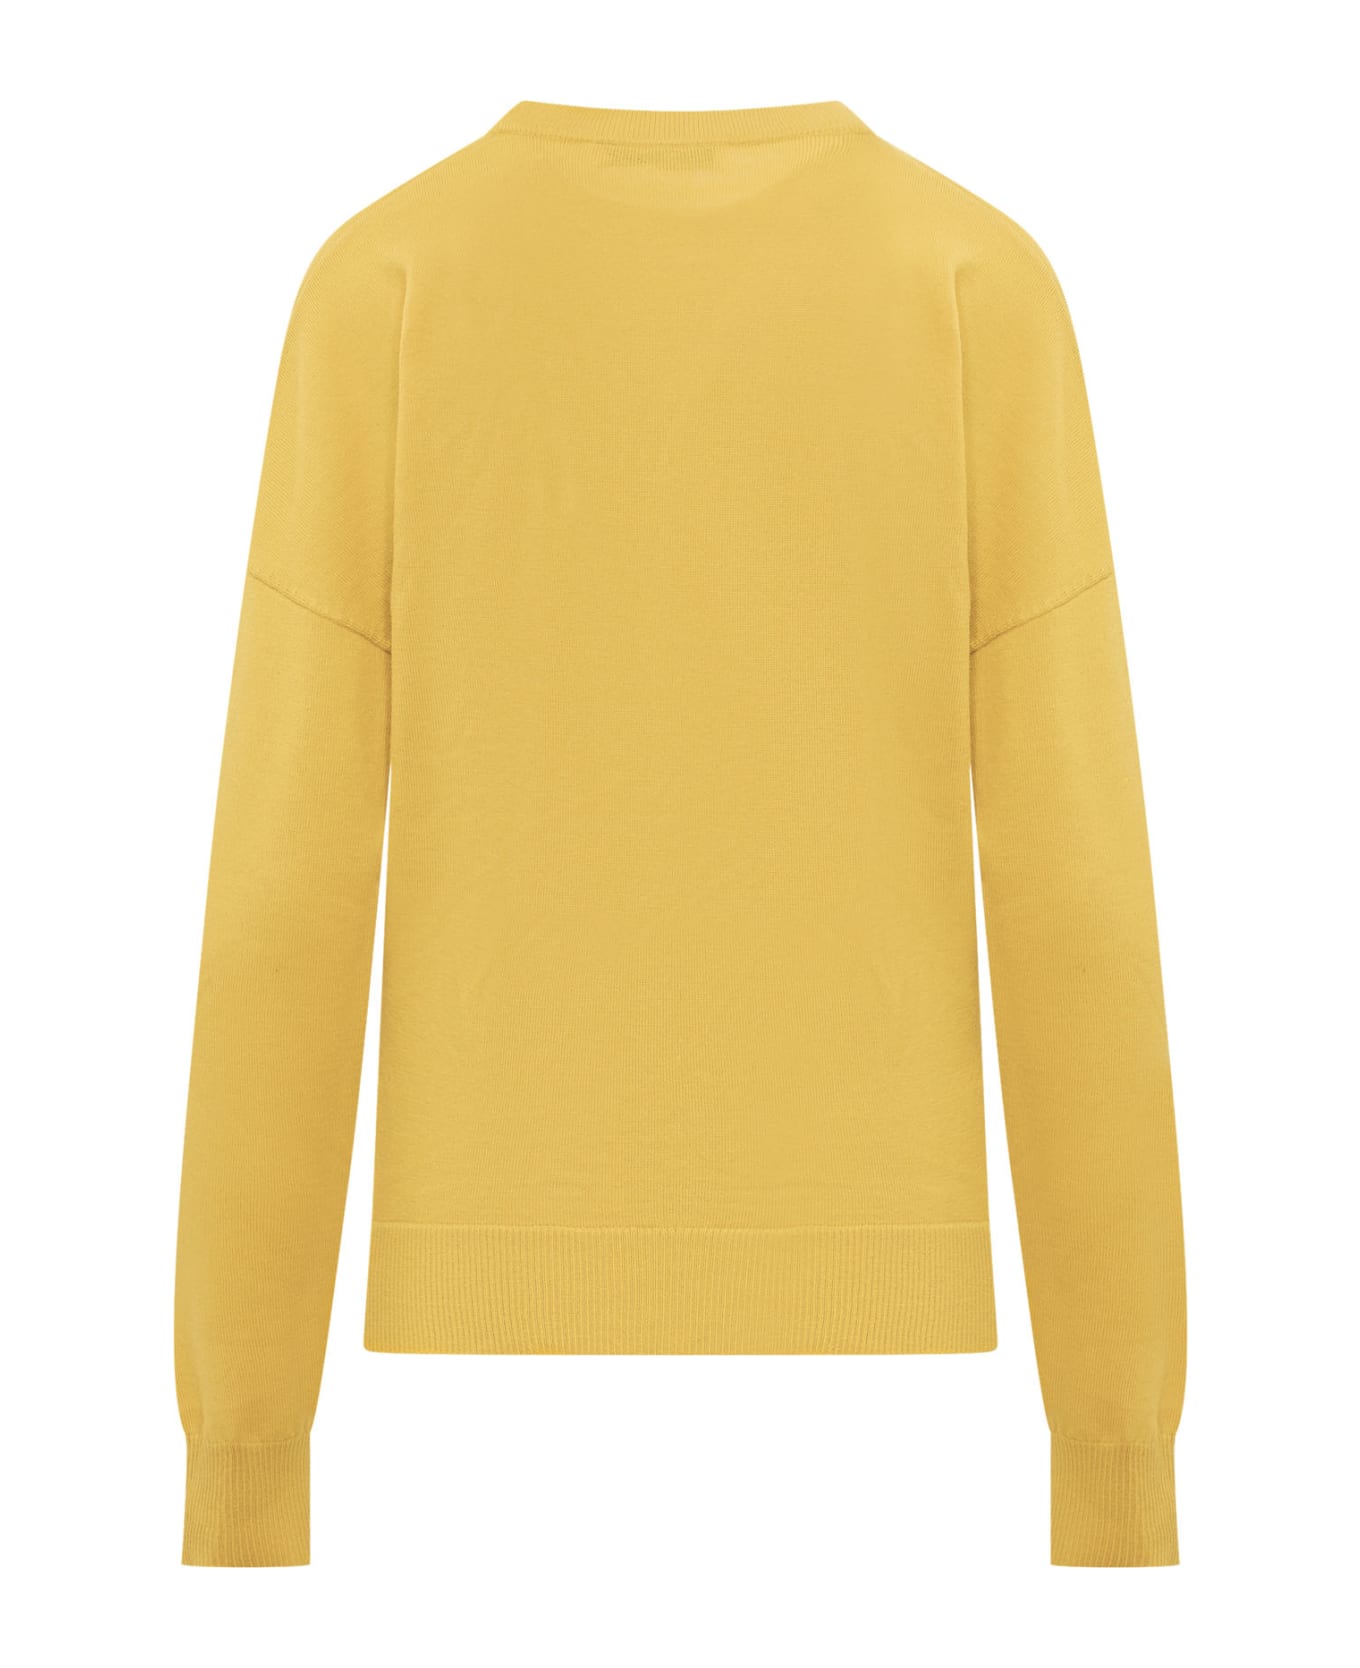 J.W. Anderson Sweater With Logo - YELLOW/GREY MELANGE